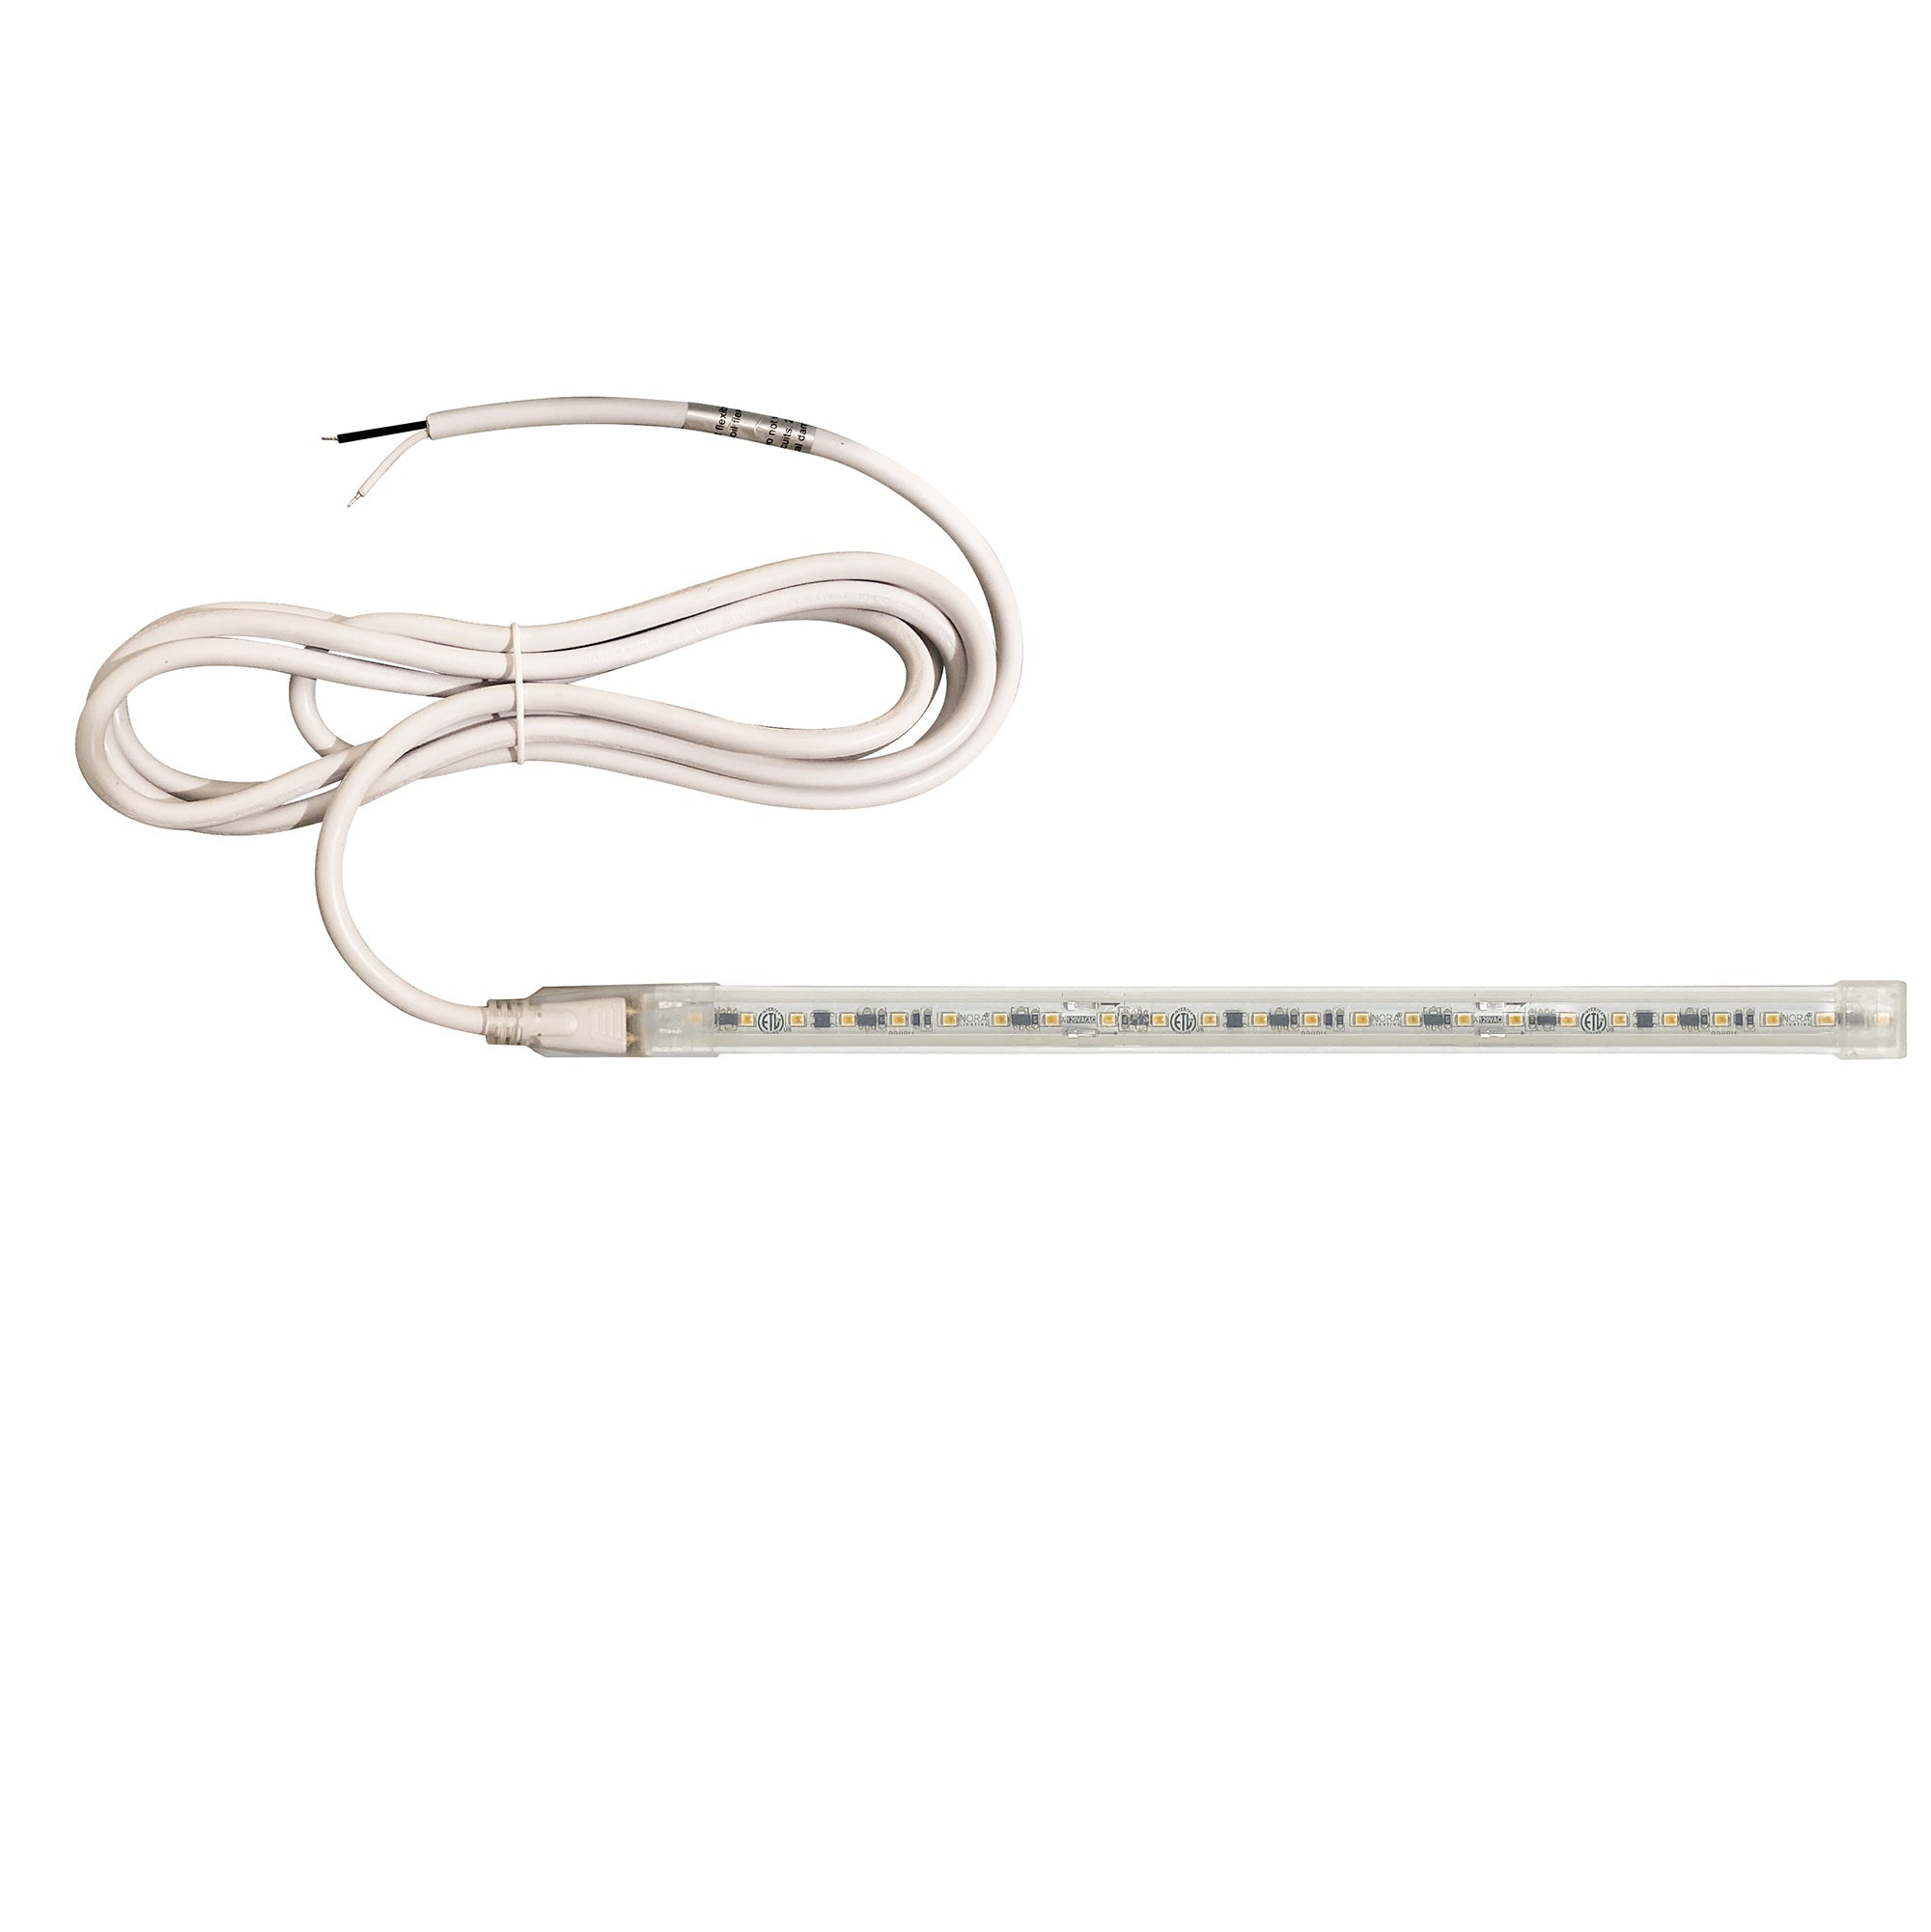 Nora Lighting NUTP13-W116-4-12-930/HW - Accent / Undercabinet - Custom Cut 116-ft, 4-in 120V Continuous LED Tape Light, 330lm / 3.6W per foot, 3000K, w/ Mounting Clips and 8' Hardwired Power Cord